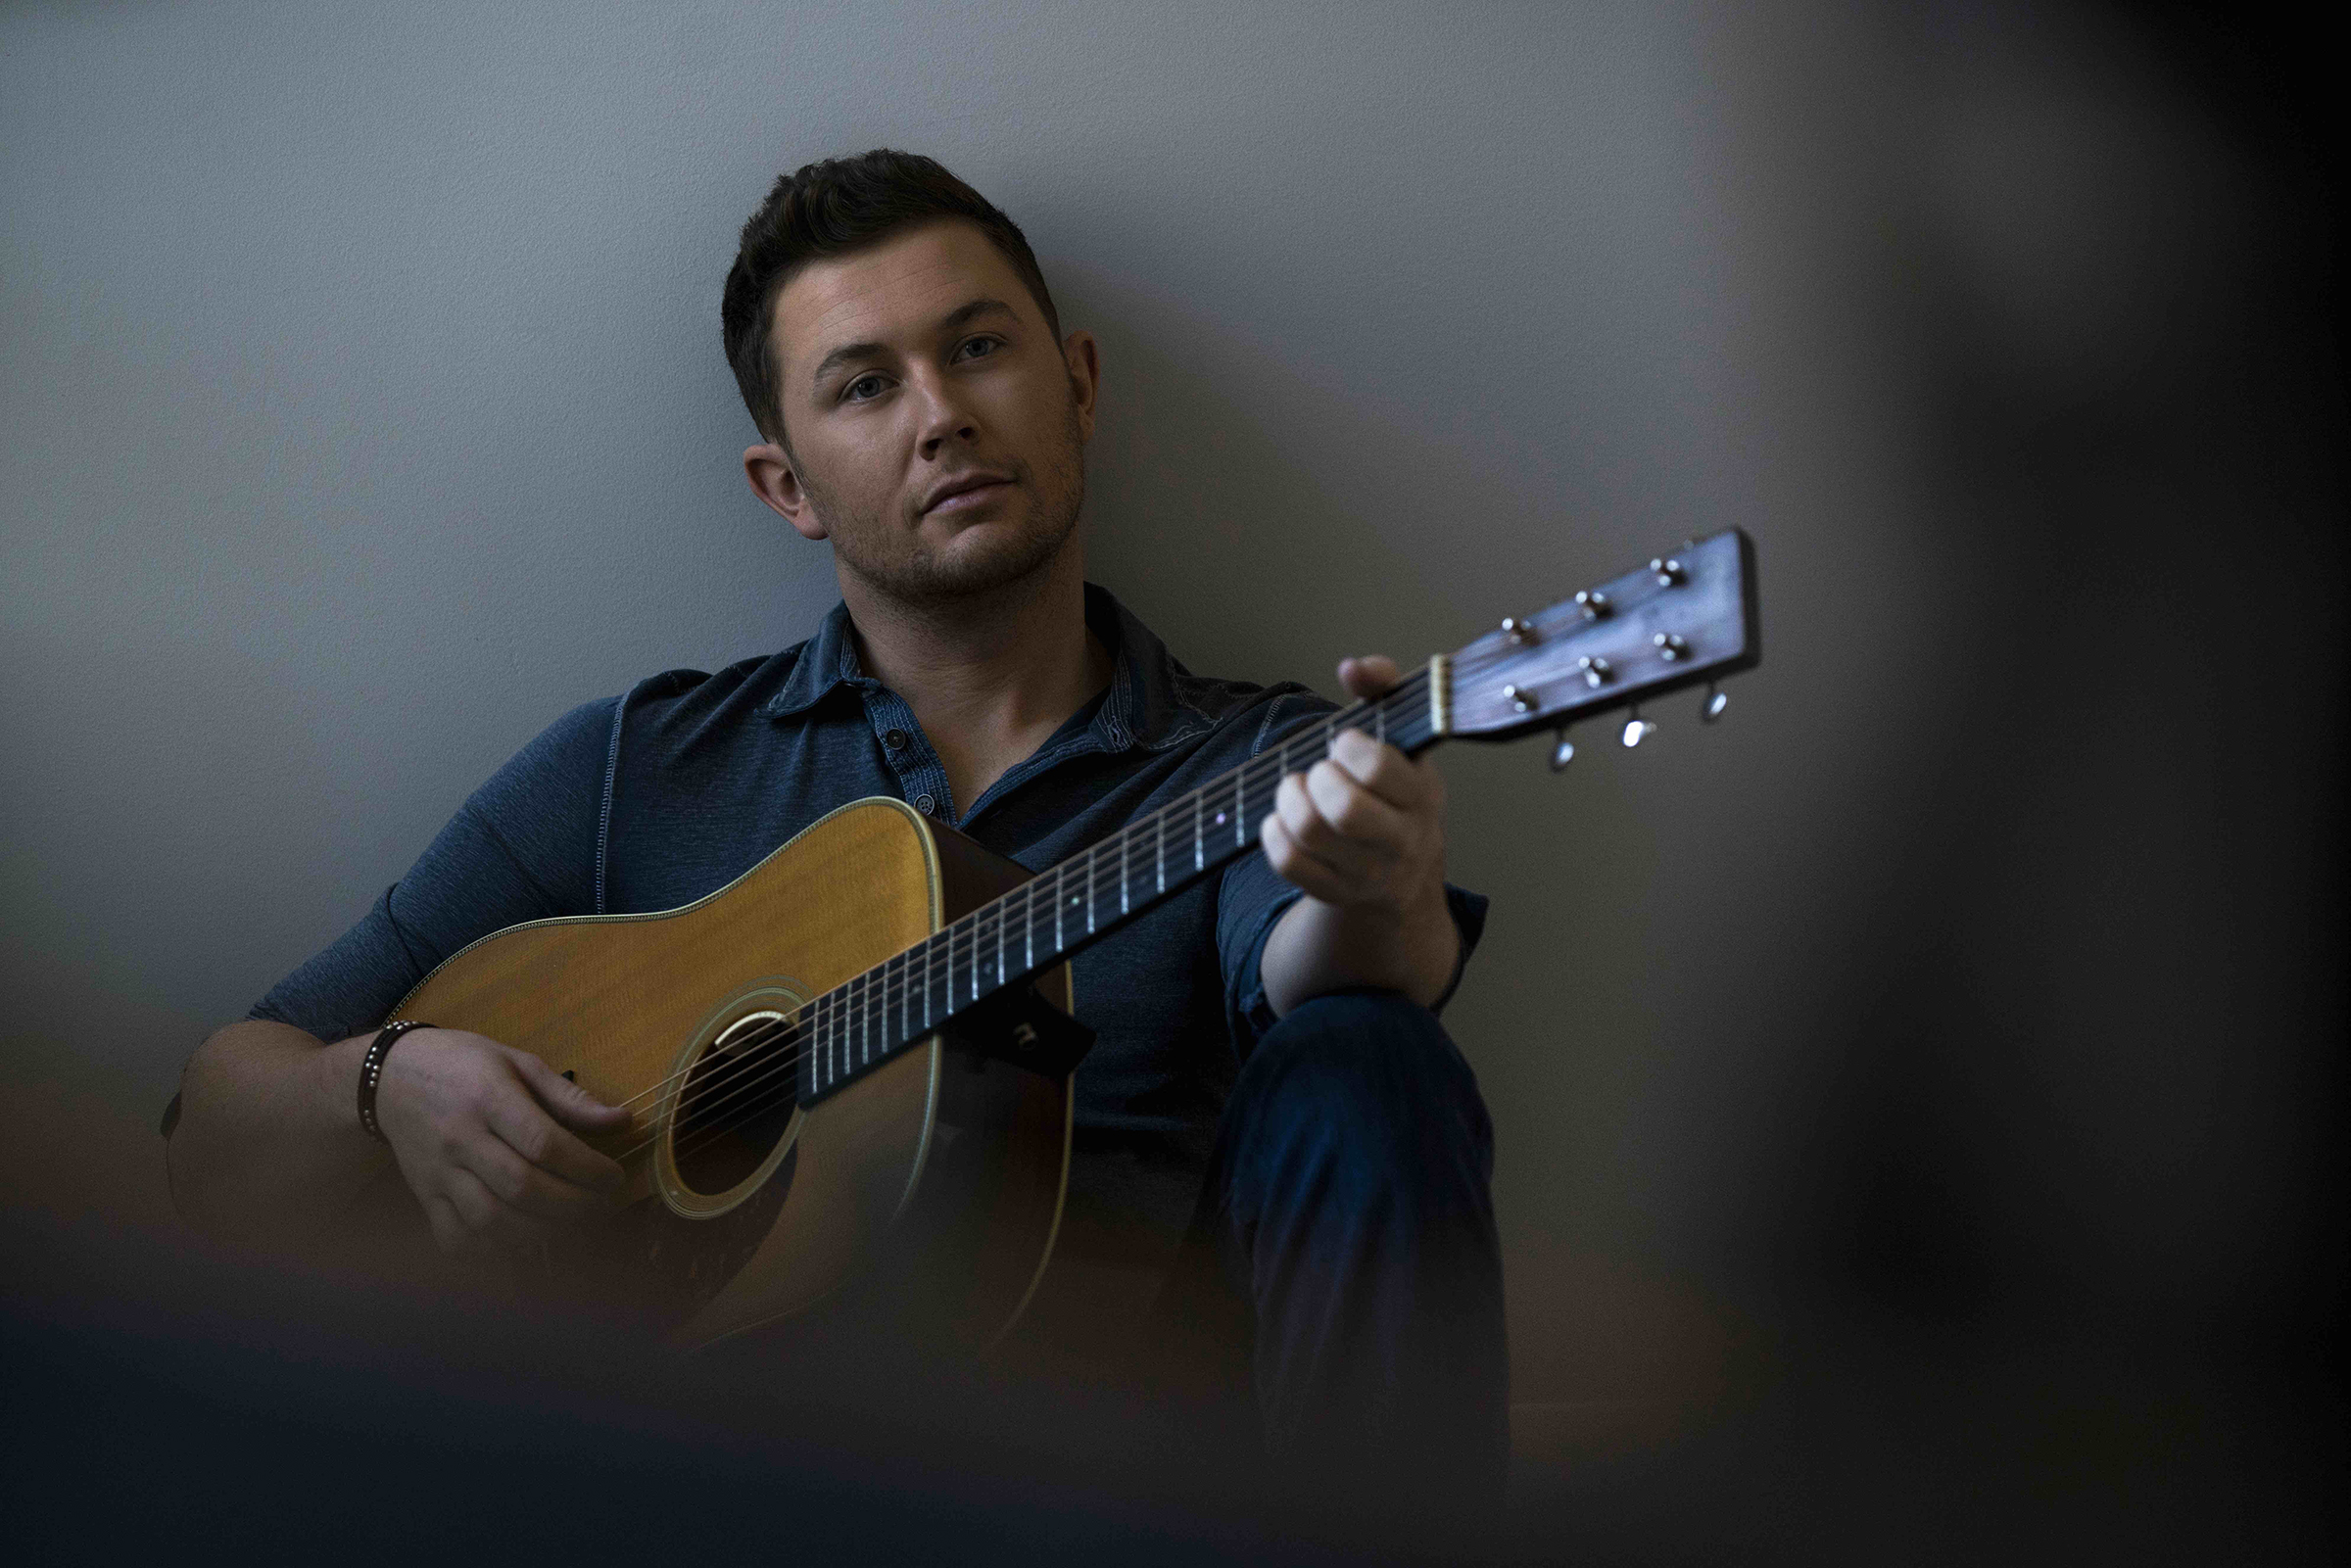 US country star, SCOTTY MCCREERY announces headline show at The Limelight1 on Friday, May 22nd 